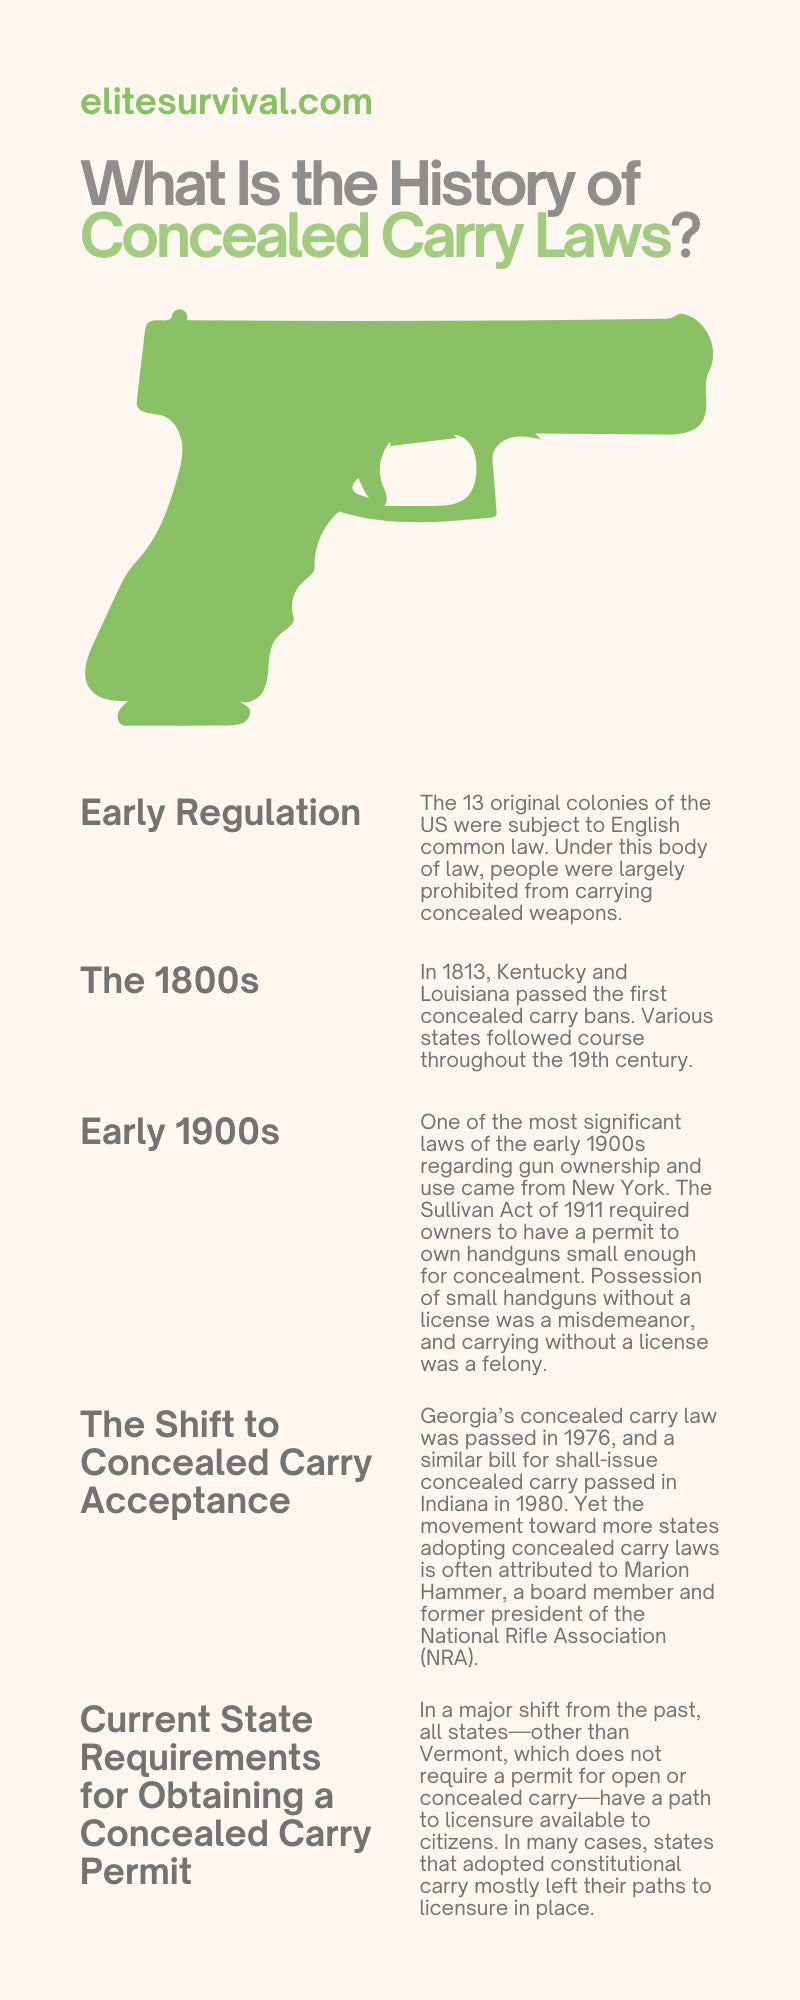 What Is the History of Concealed Carry Laws?